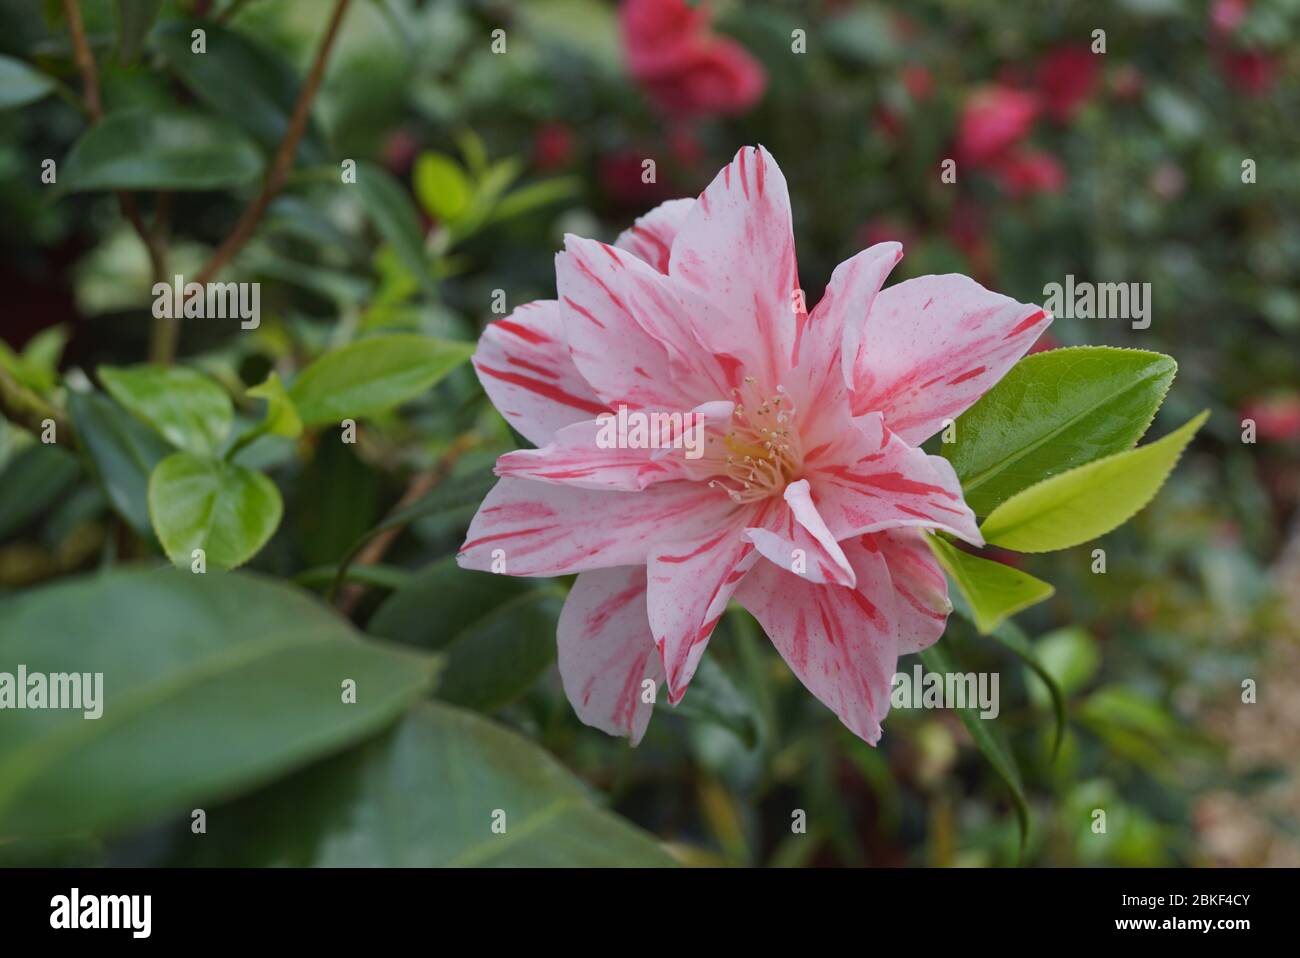 A pink and red blossom of Camellia japonica Stock Photo